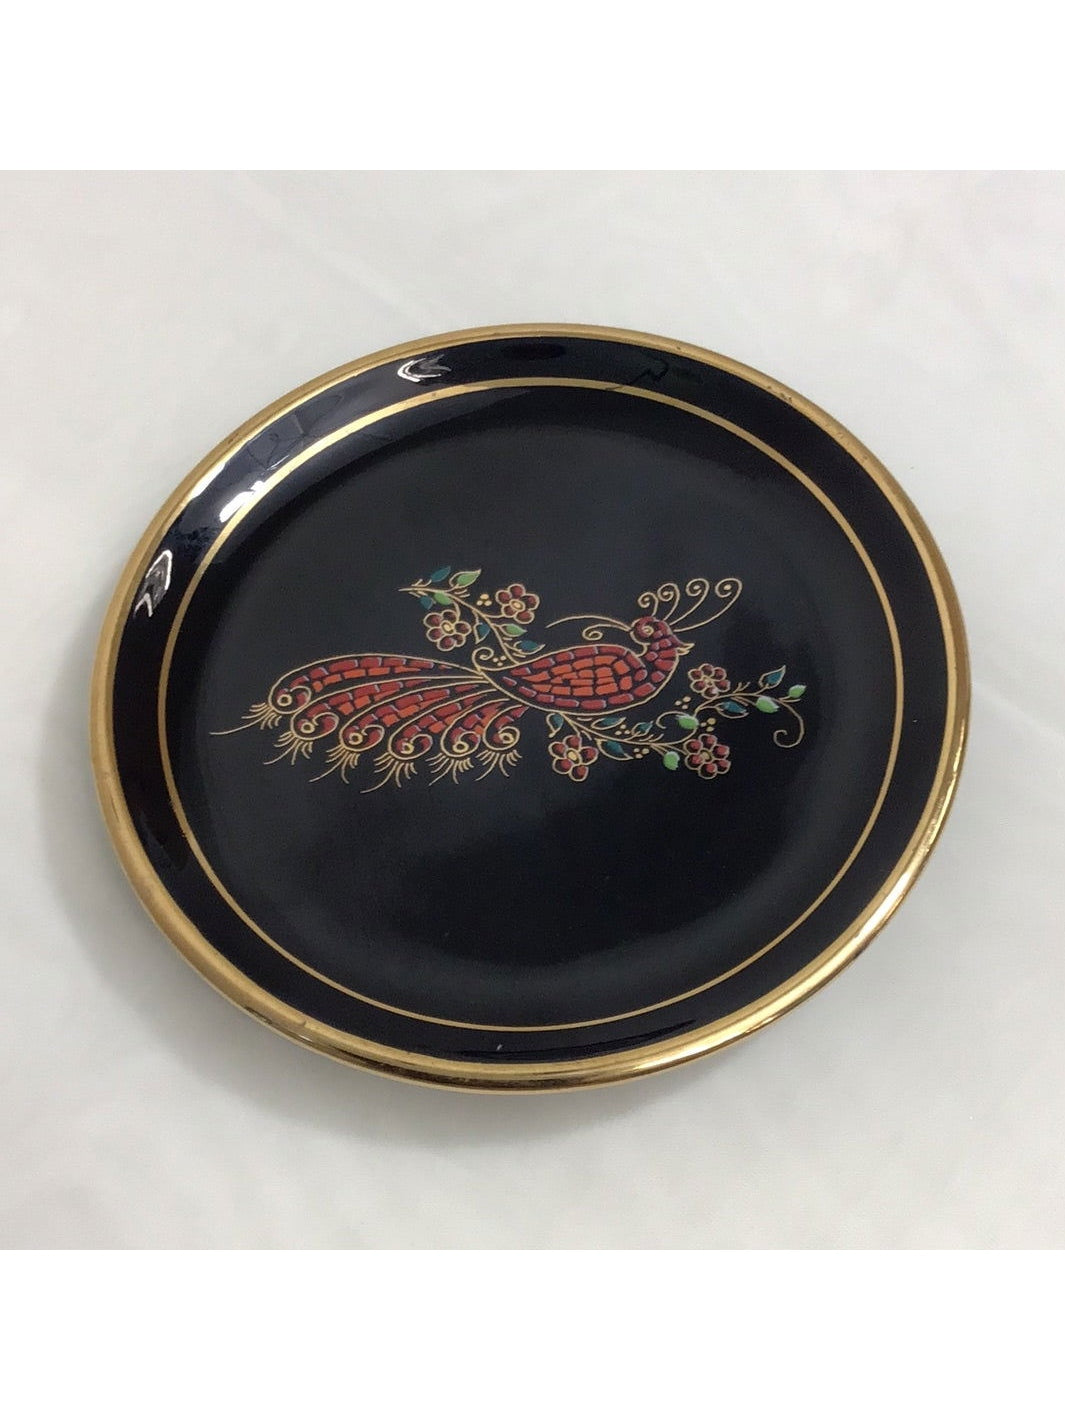 Vintage P Anapale Black with Bird Trinket Dish, 24k Trim - The Kennedy Collective Thrift - 